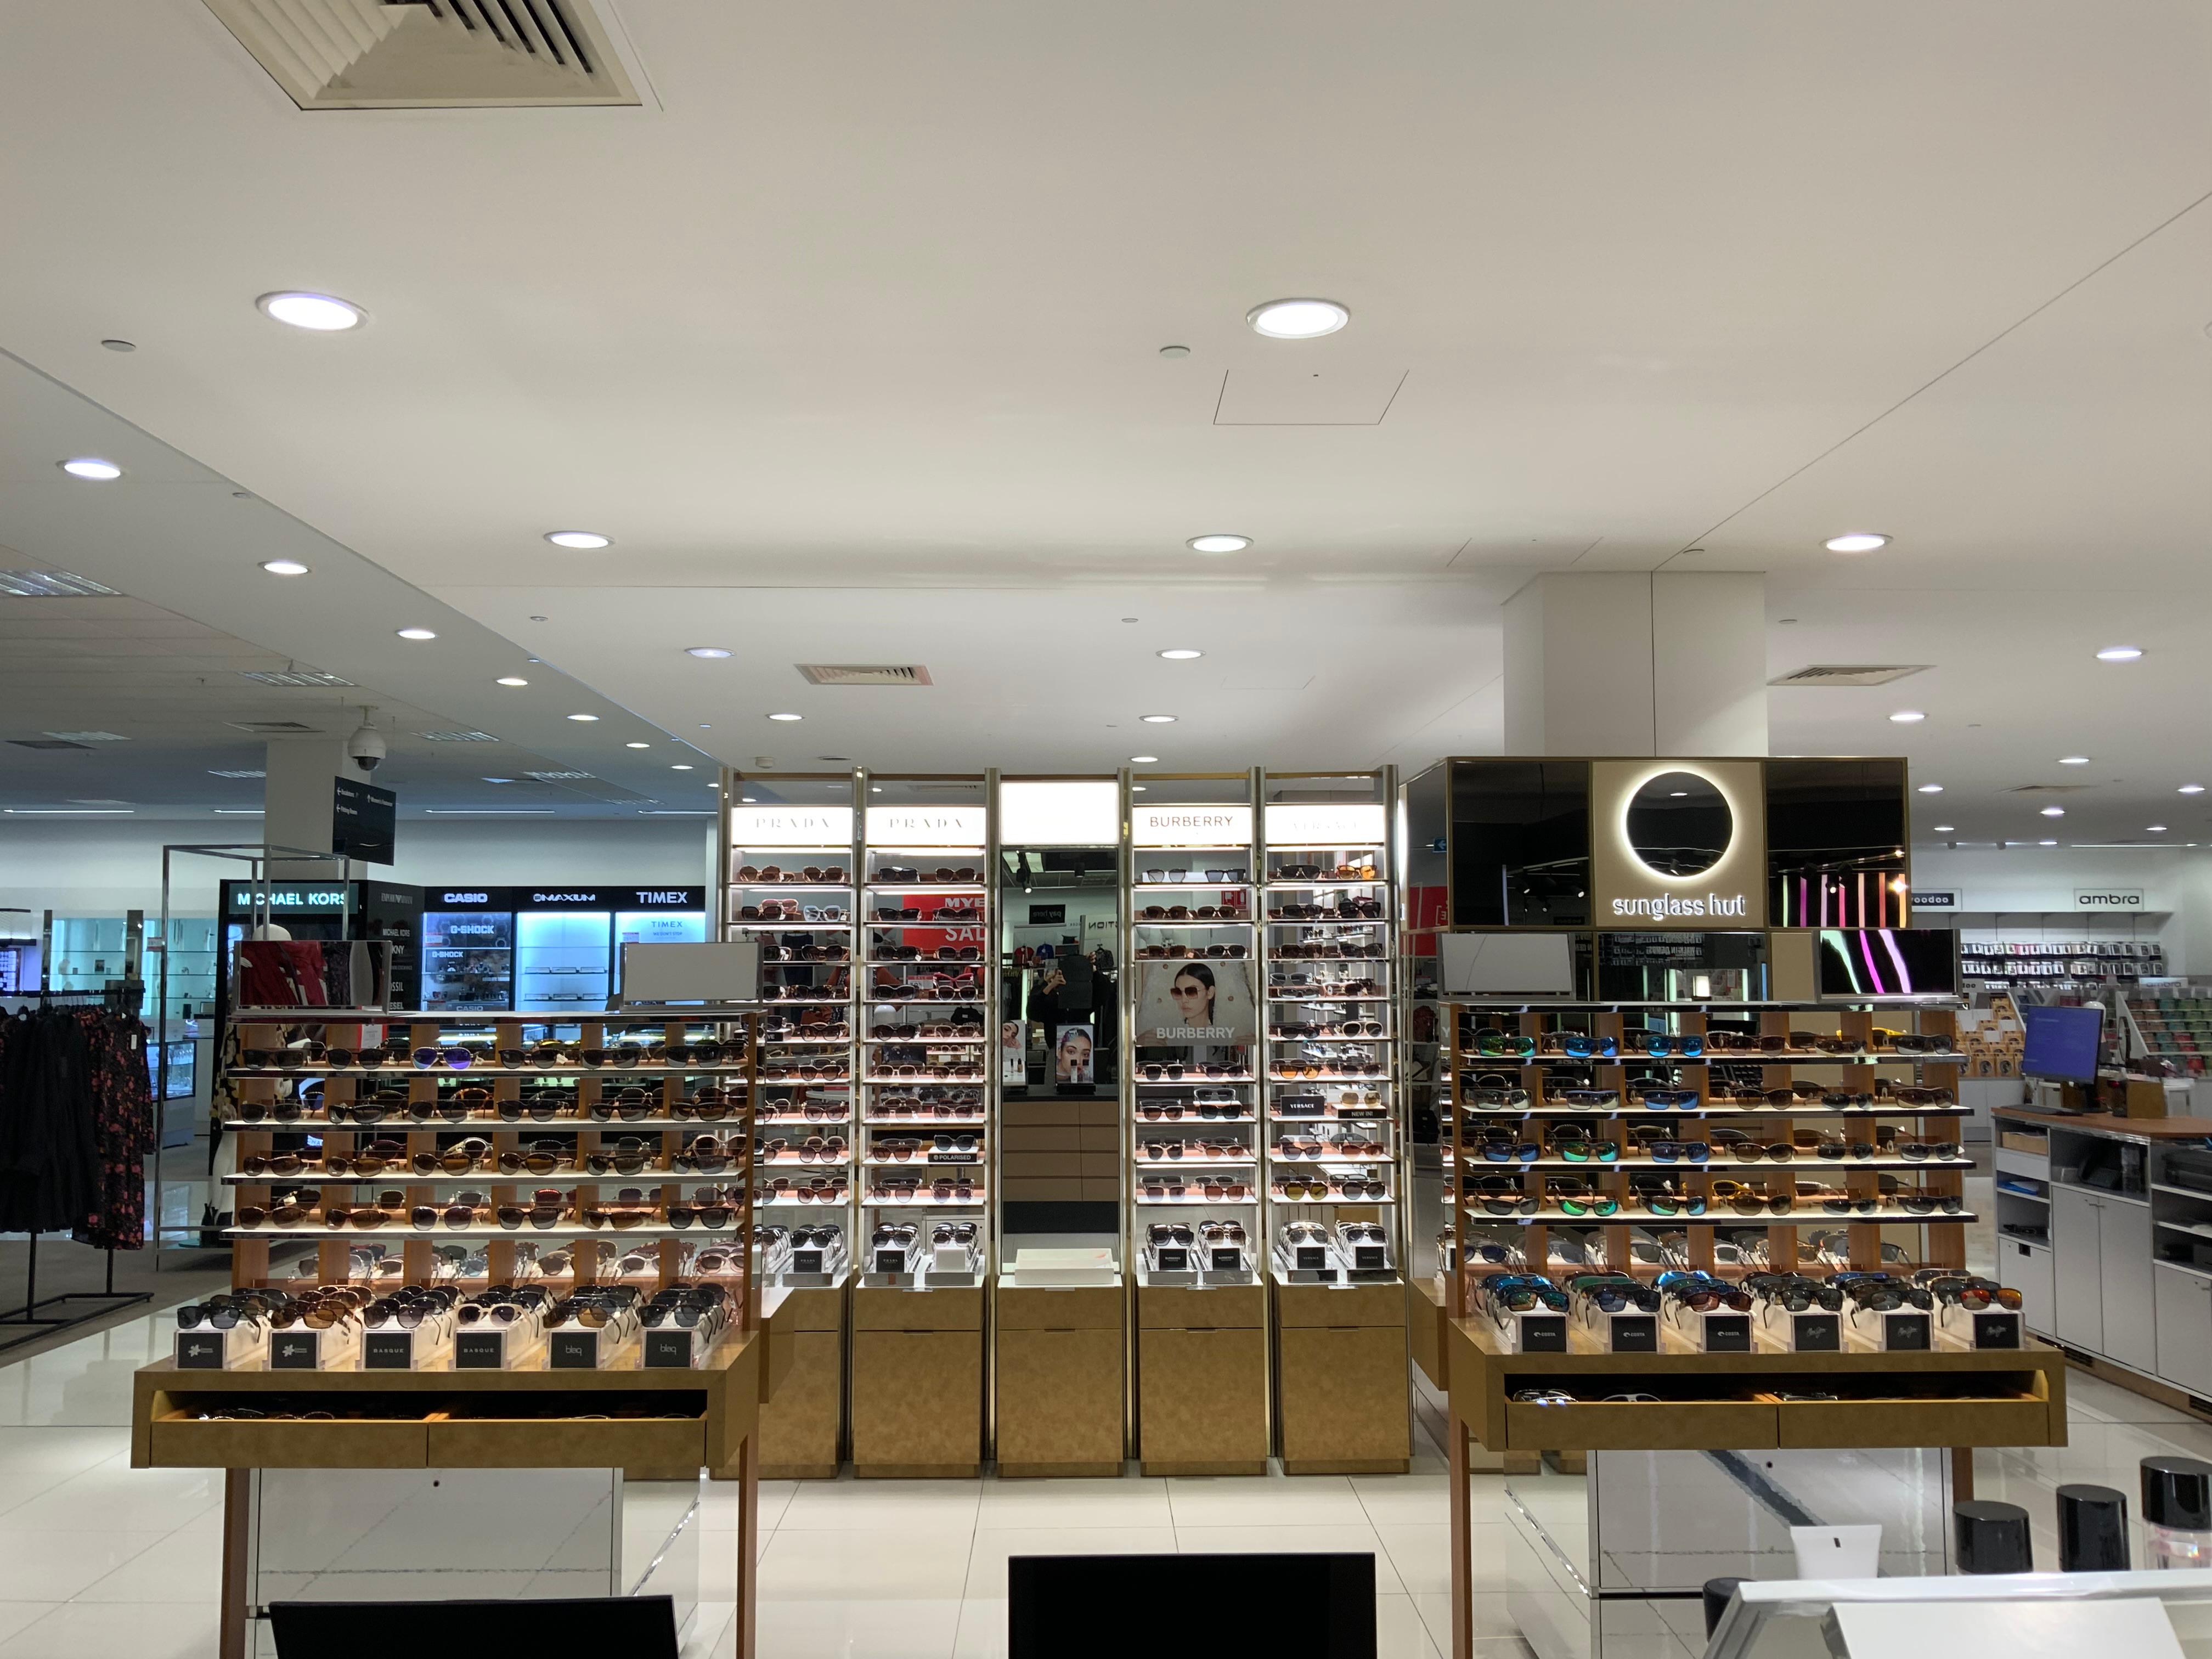 Images Sunglass Hut Myer Indooroopilly